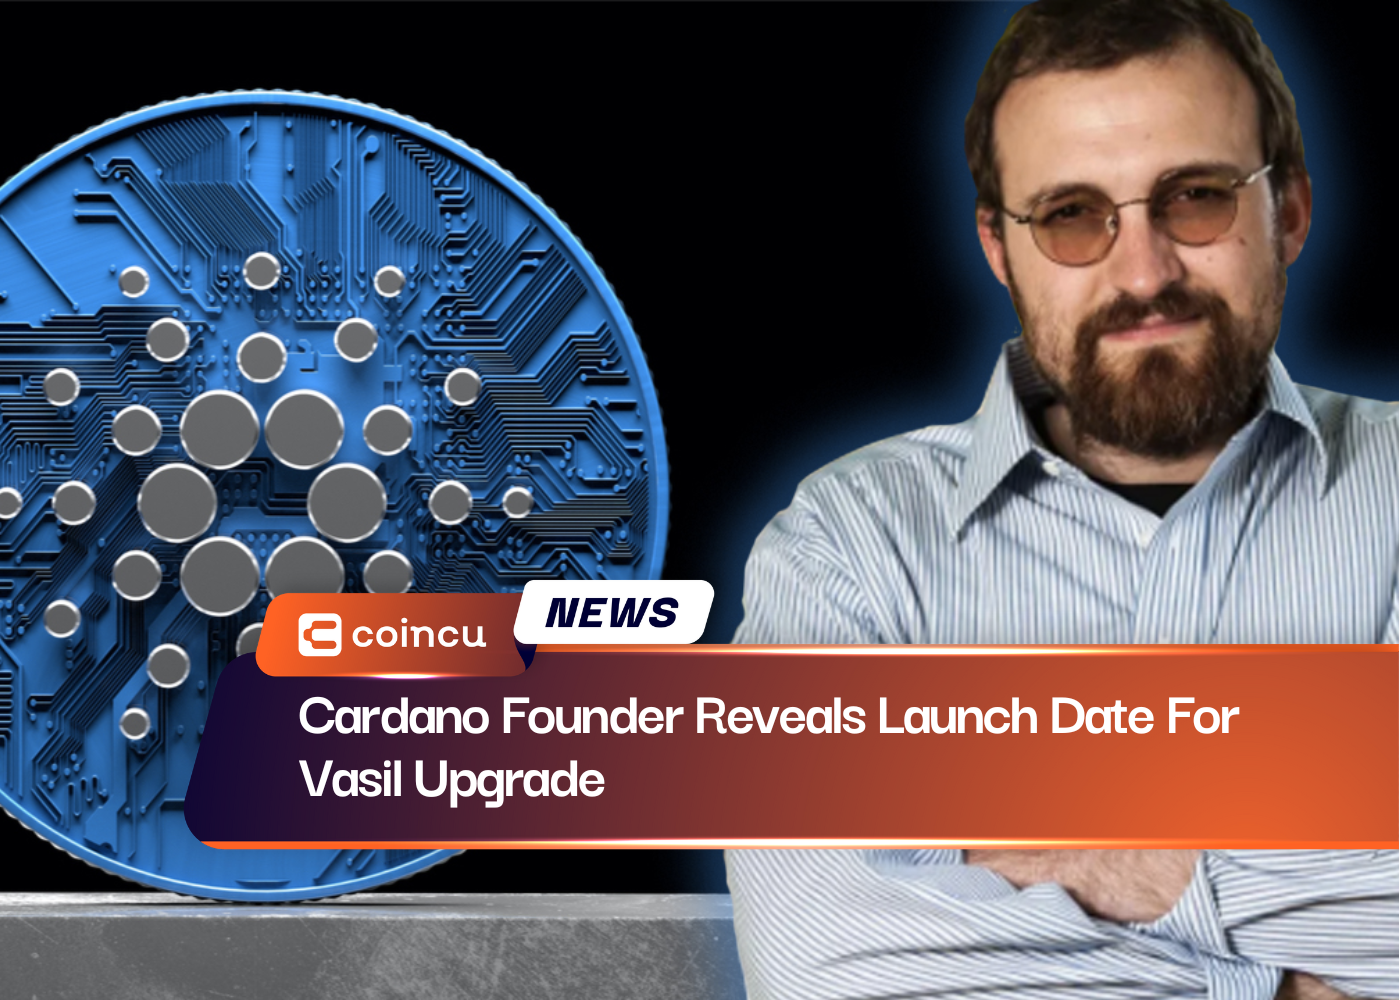 Cardano Founder Reveals Launch Date For Vasil Upgrade